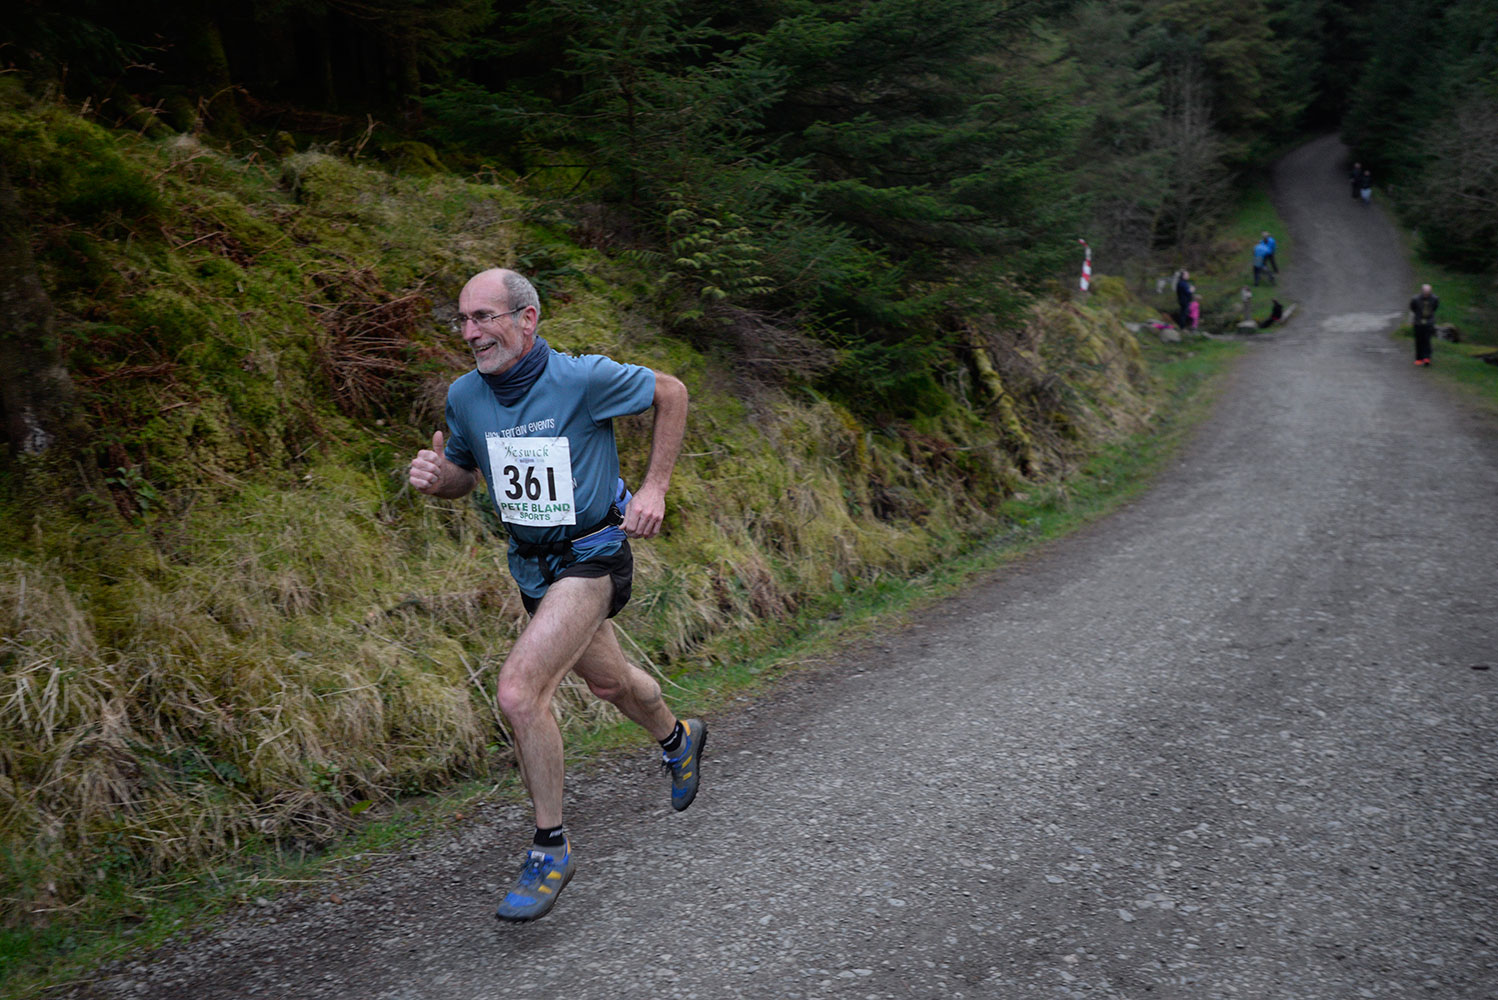 This short (4km / 2.5 mile) but brutal fell race starts from Revelin Moss in Whinlatter Forest Park, near Keswick, Cumbria. This is Phil Pearson of Northern Fells Running club nearing the finish.